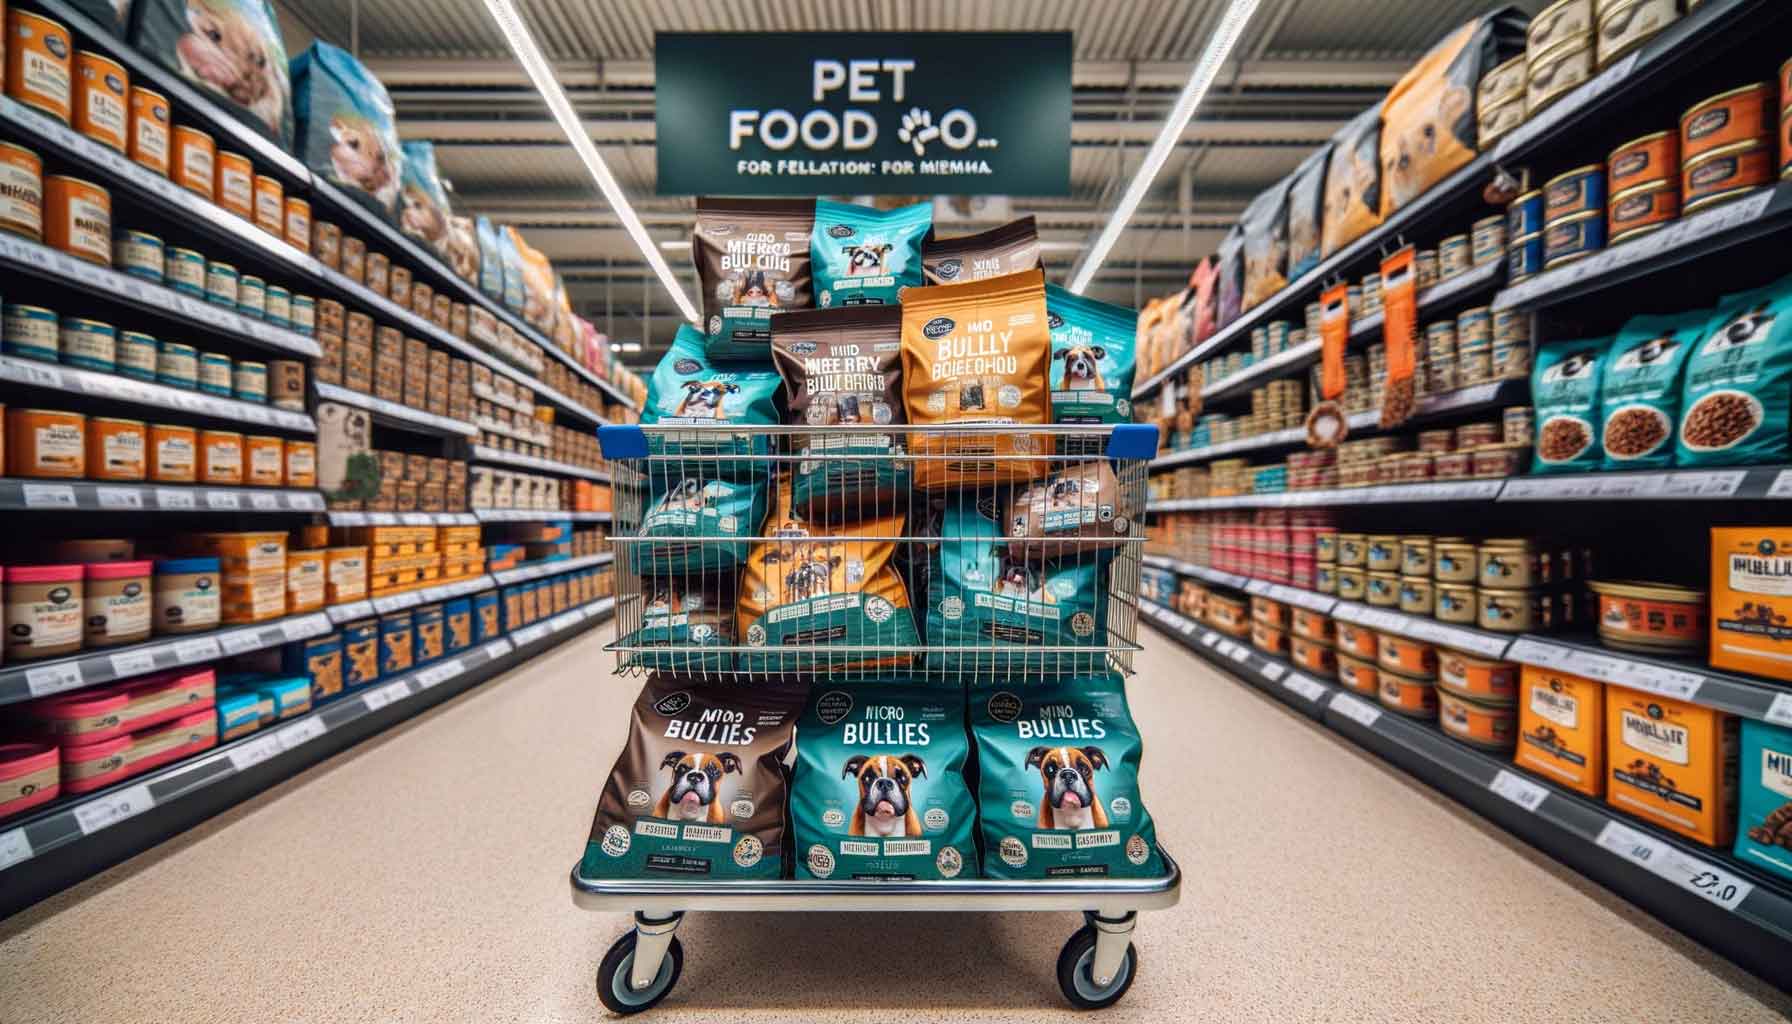 Metal grocery cart overflowing with a selection of premium dog food brands for Micro Bullies, set against the pet food section in a supermarket.